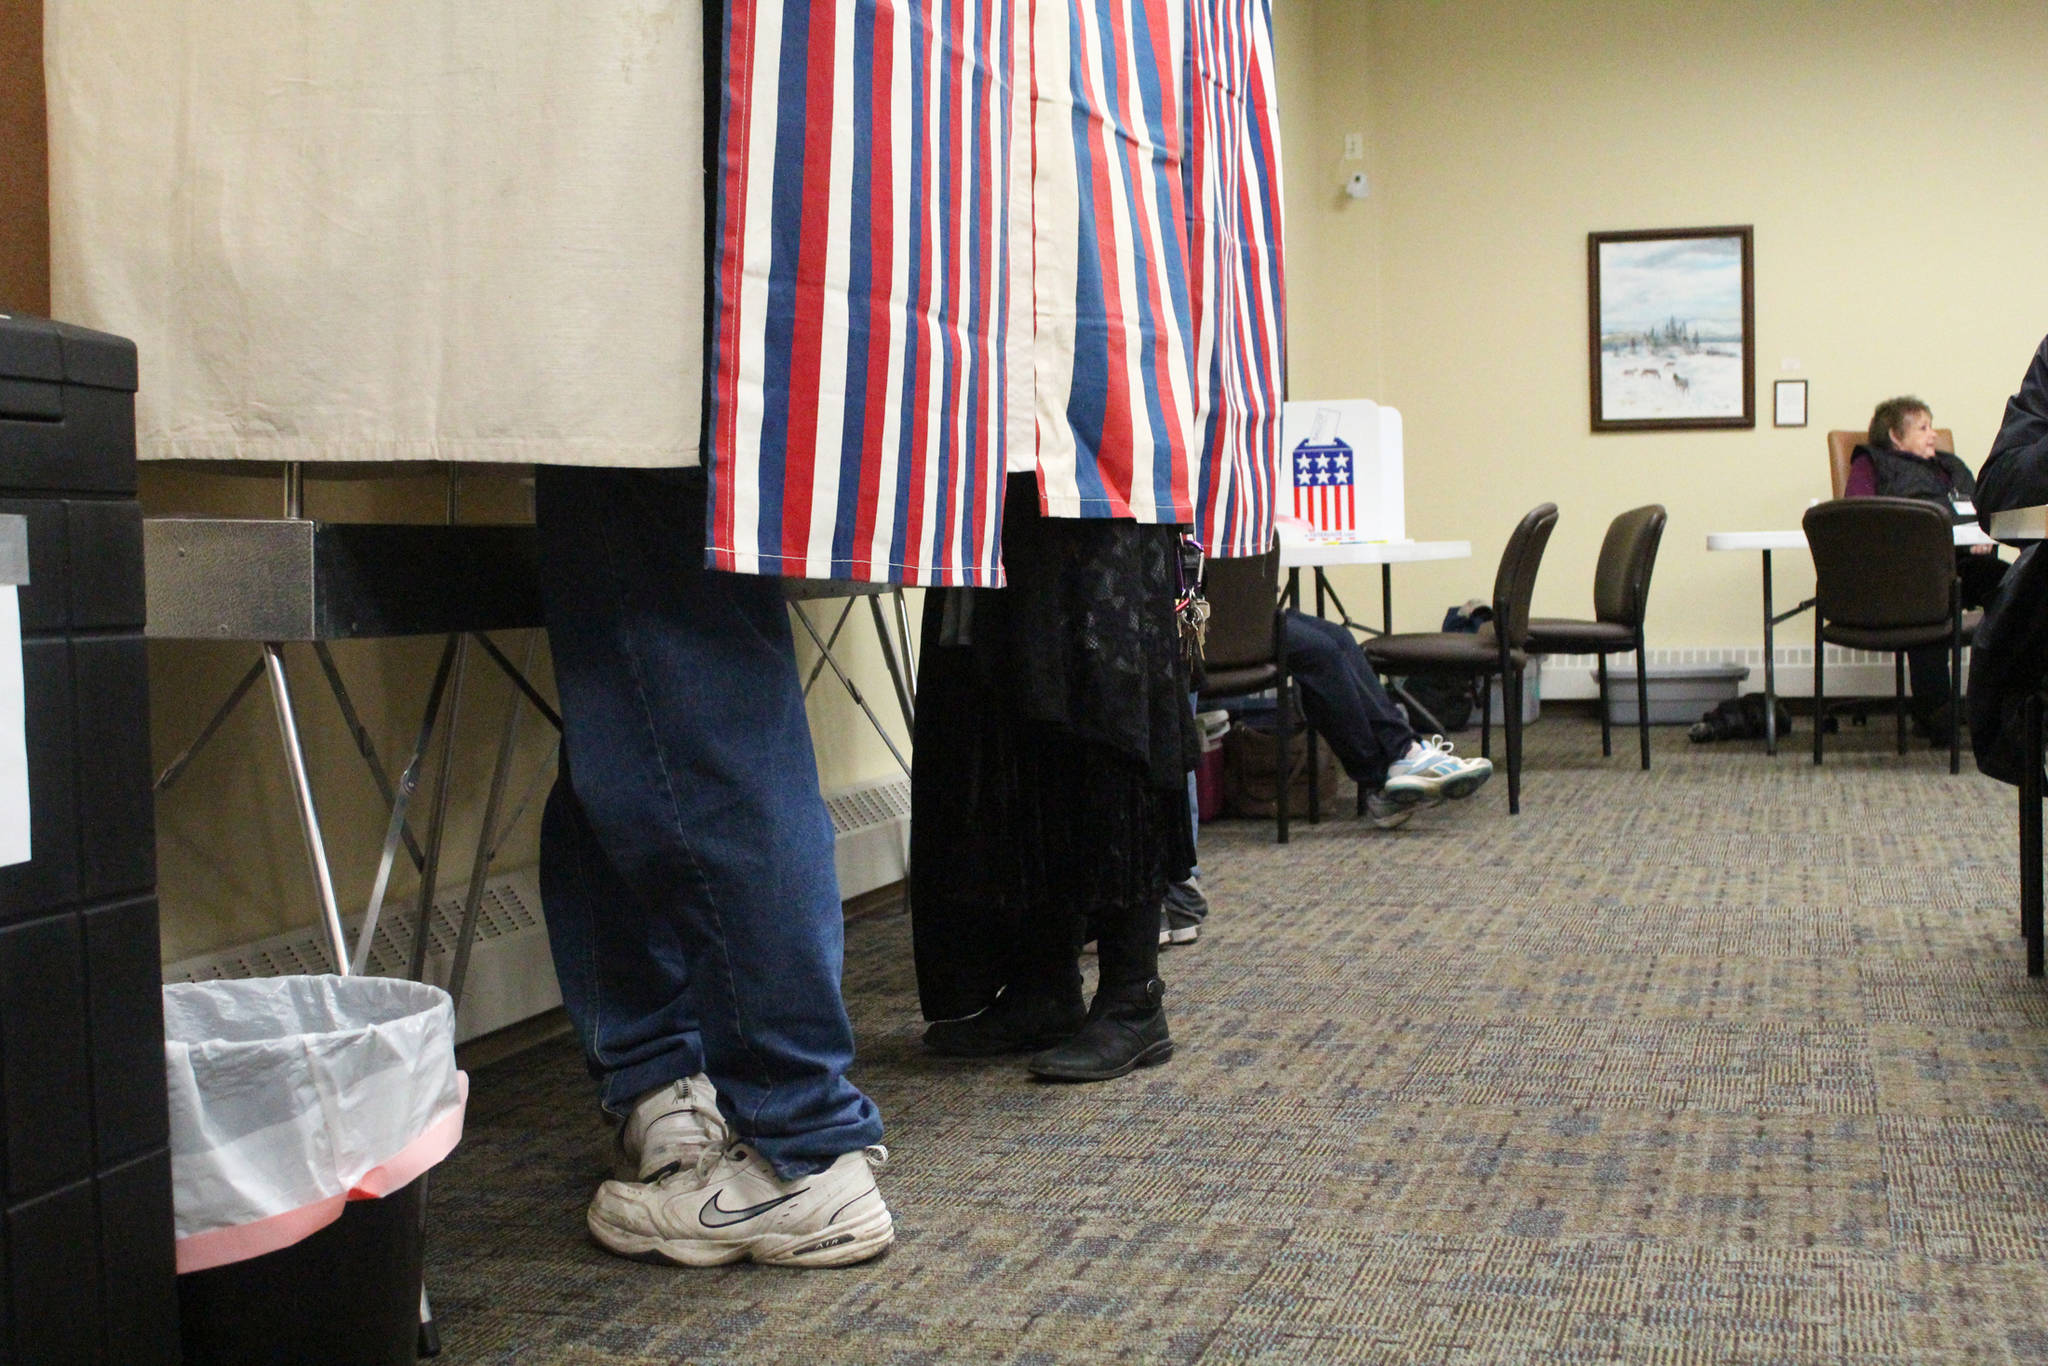 Residents vote in booths set up in Homer City Hall on Tuesday, Oct. 3, 2017 in Homer, Alaska. (Photo by Megan Pacer/Homer News)